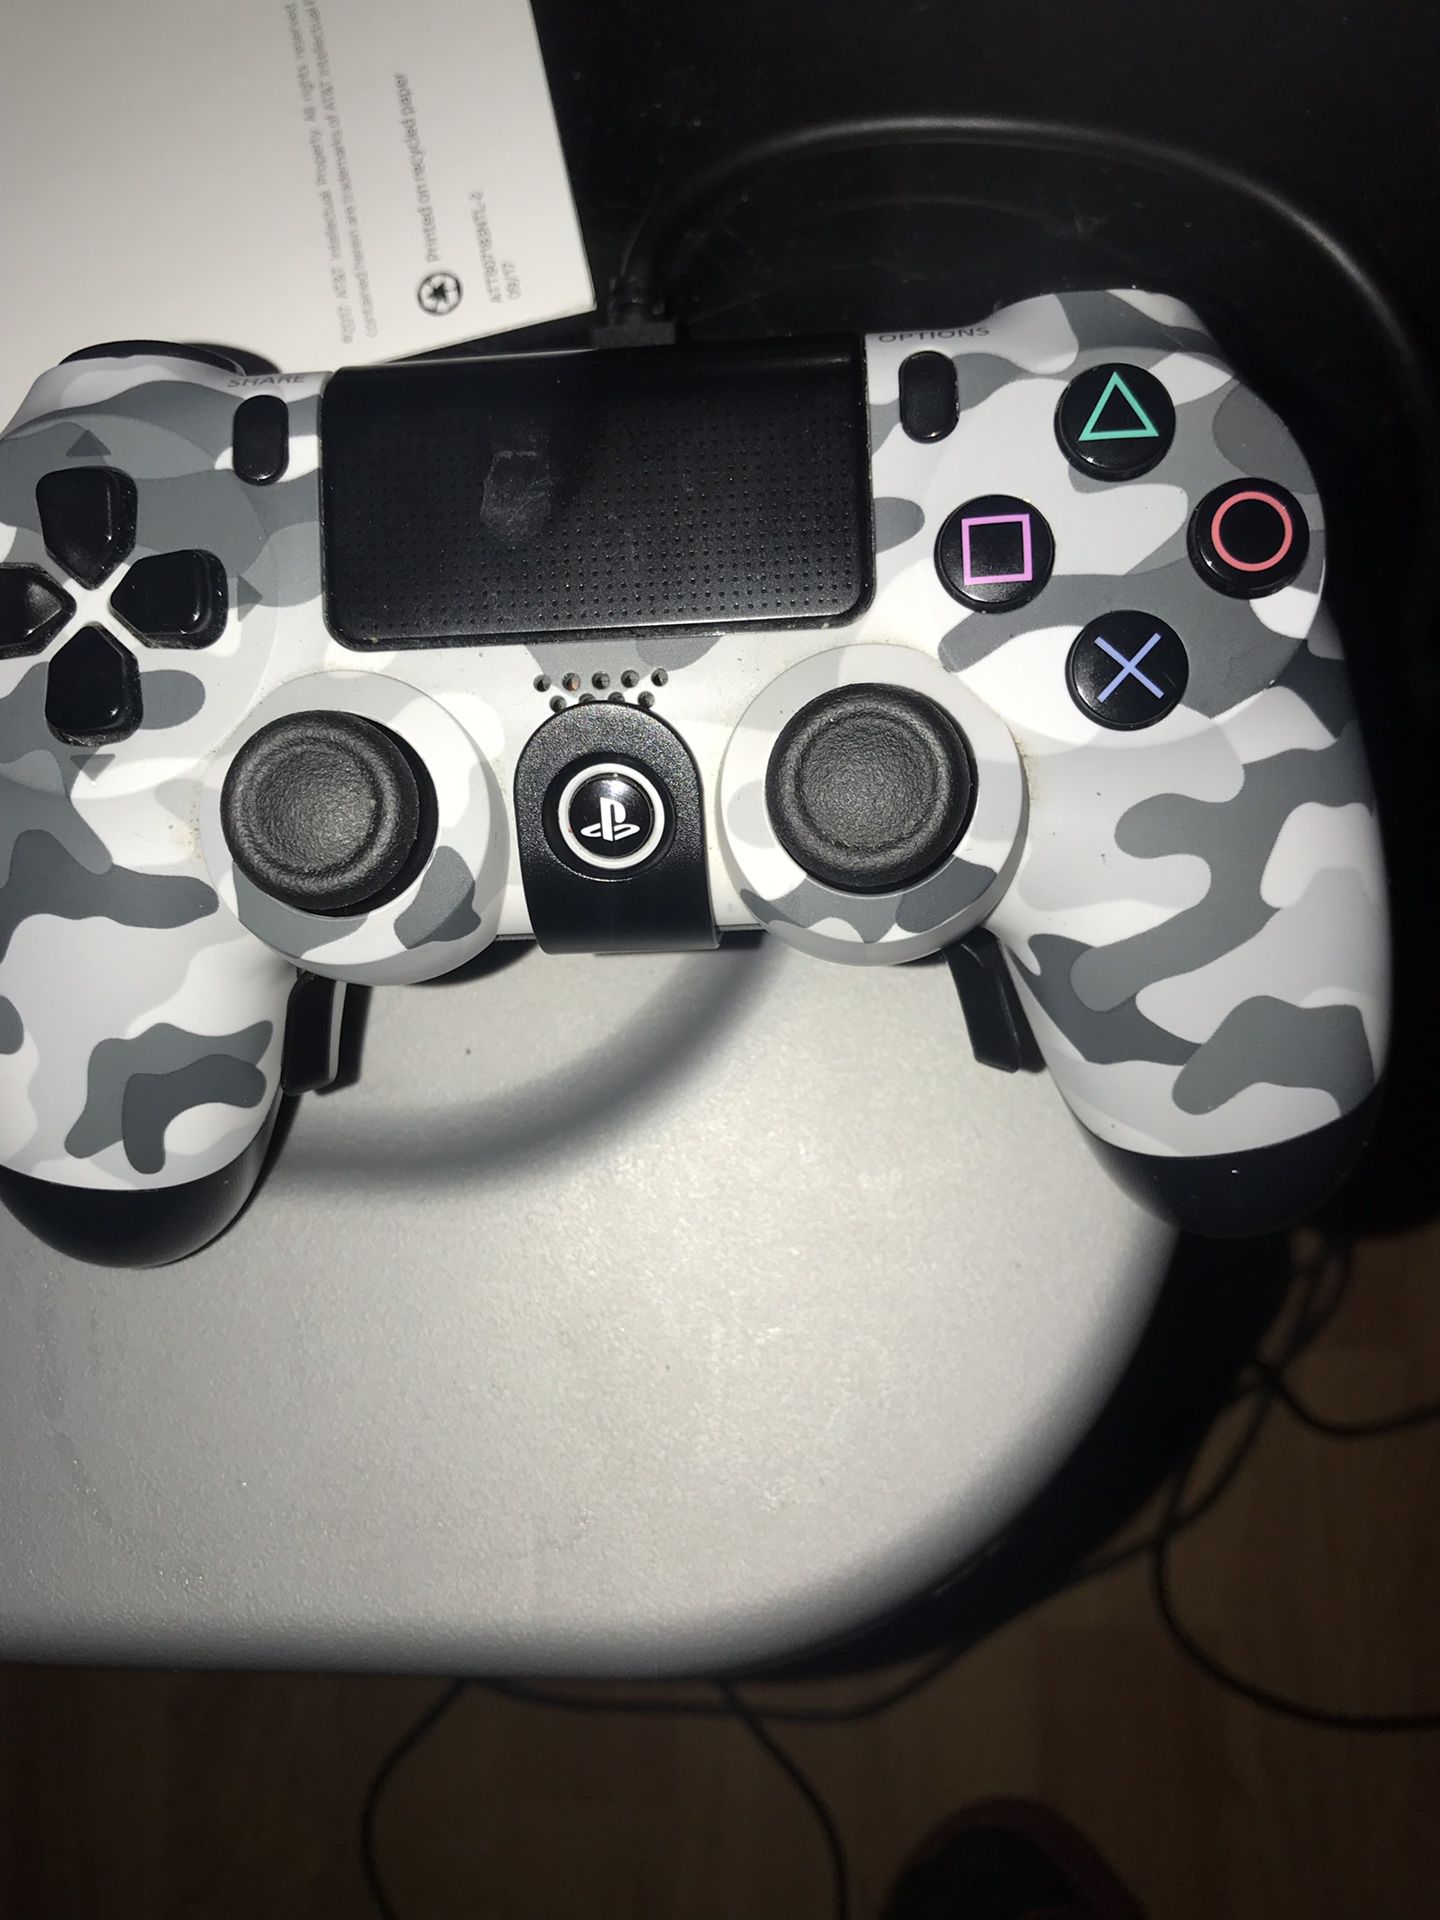 Ps4 controller with elite panels and charger